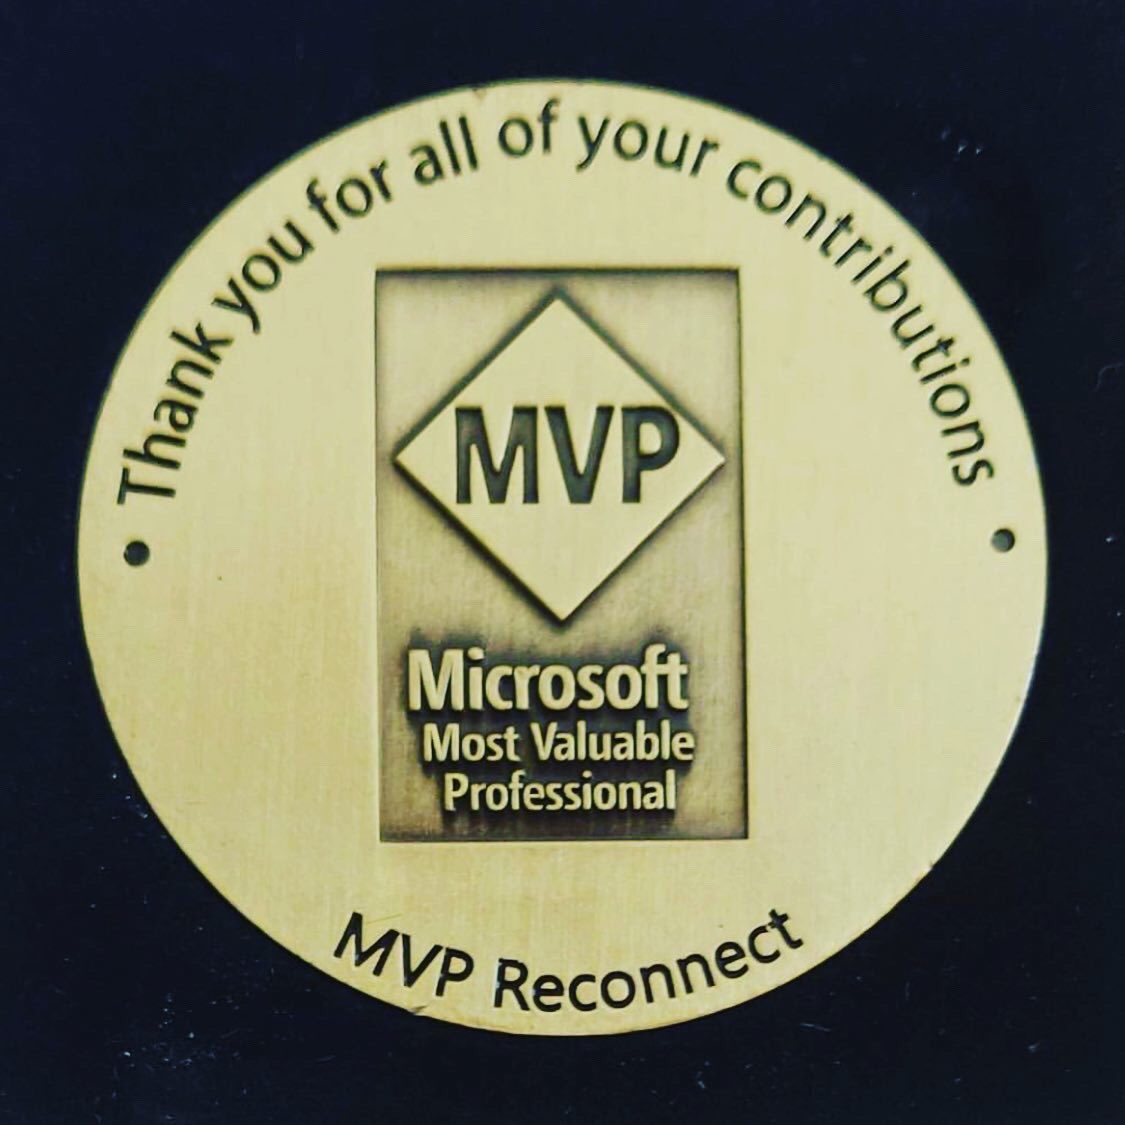 Thank you, Microsoft Most Valuable Professionals in the world!! #microsoft #mvp #mostvaluableprofessional #microsoftlife